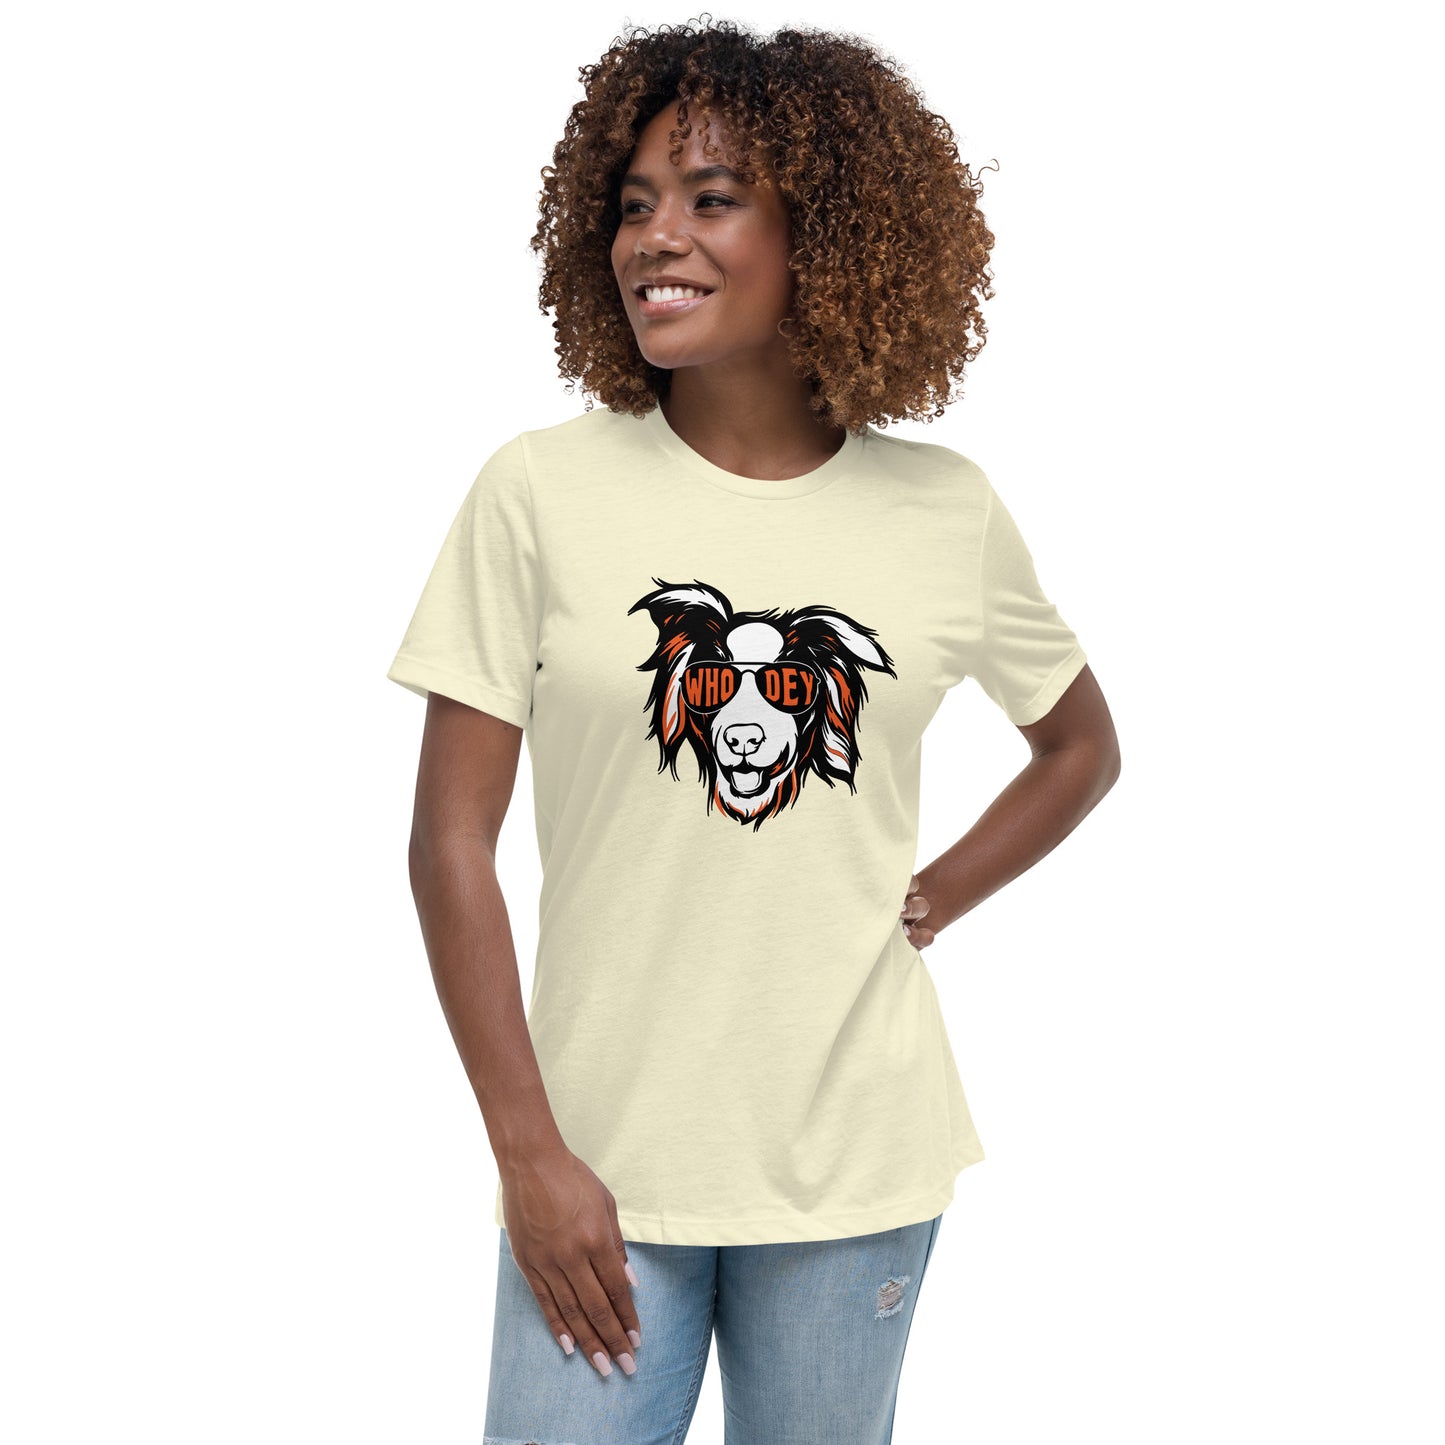 Border Collie Who Dey Women's Relaxed T-Shirt